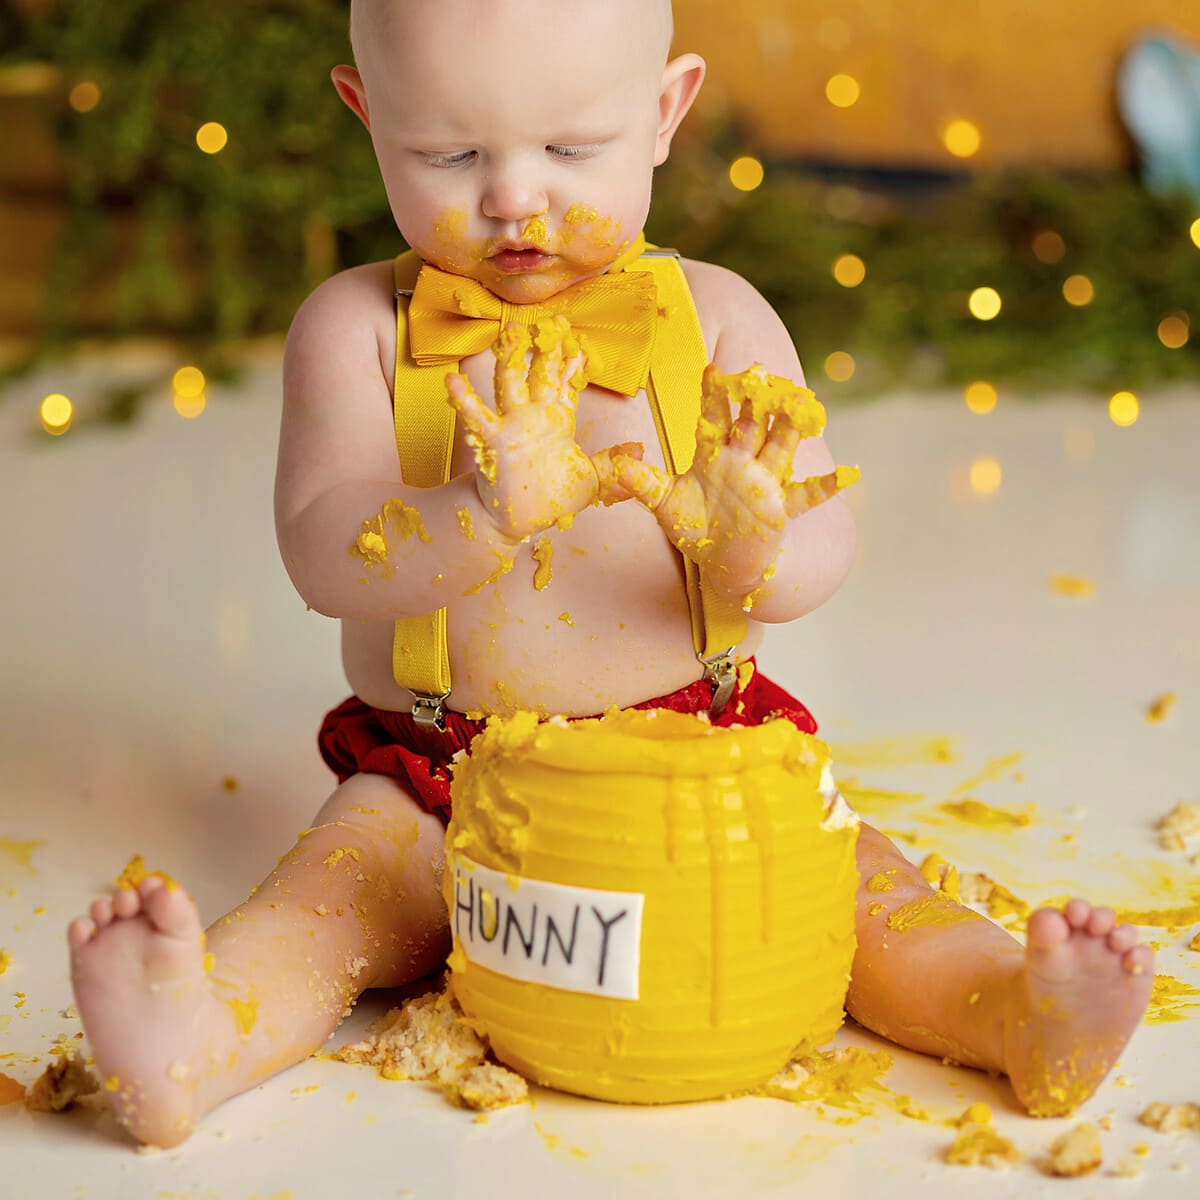 Cake Smash Session. A baby boy is playing with a yellow cake that looks like a pot of honey